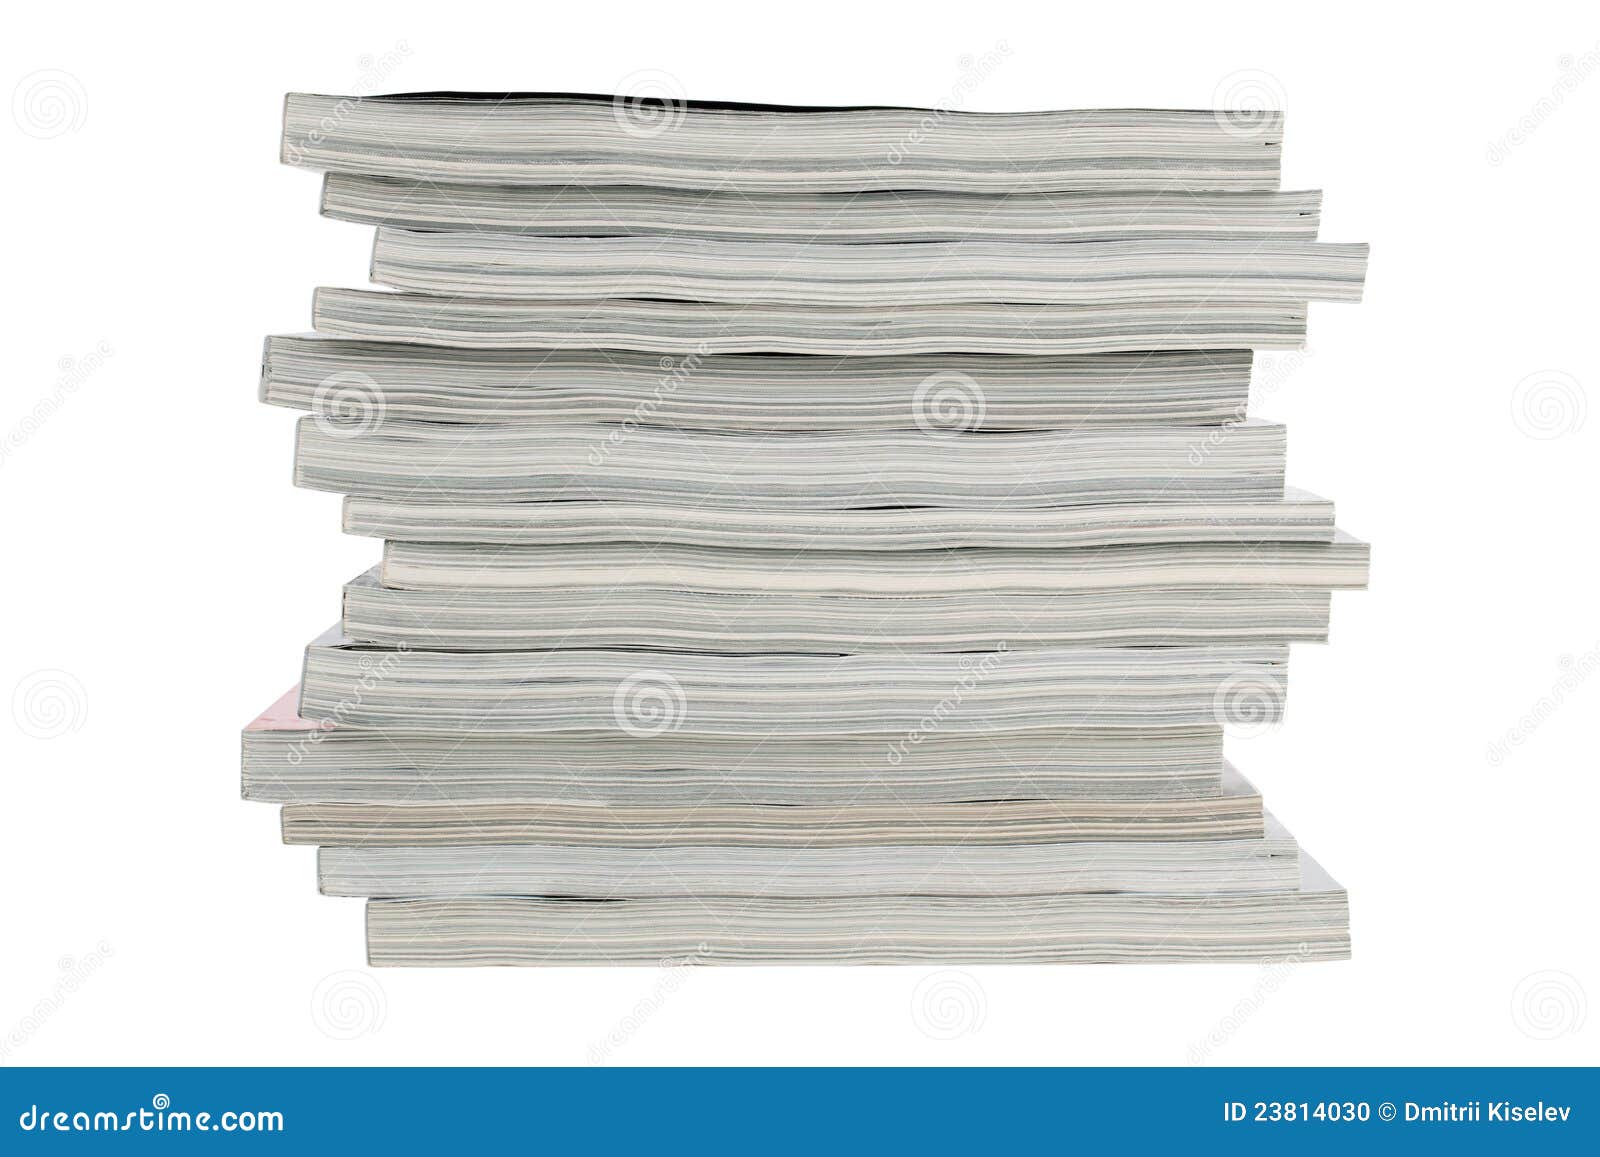 stack of old magazines unnecessary